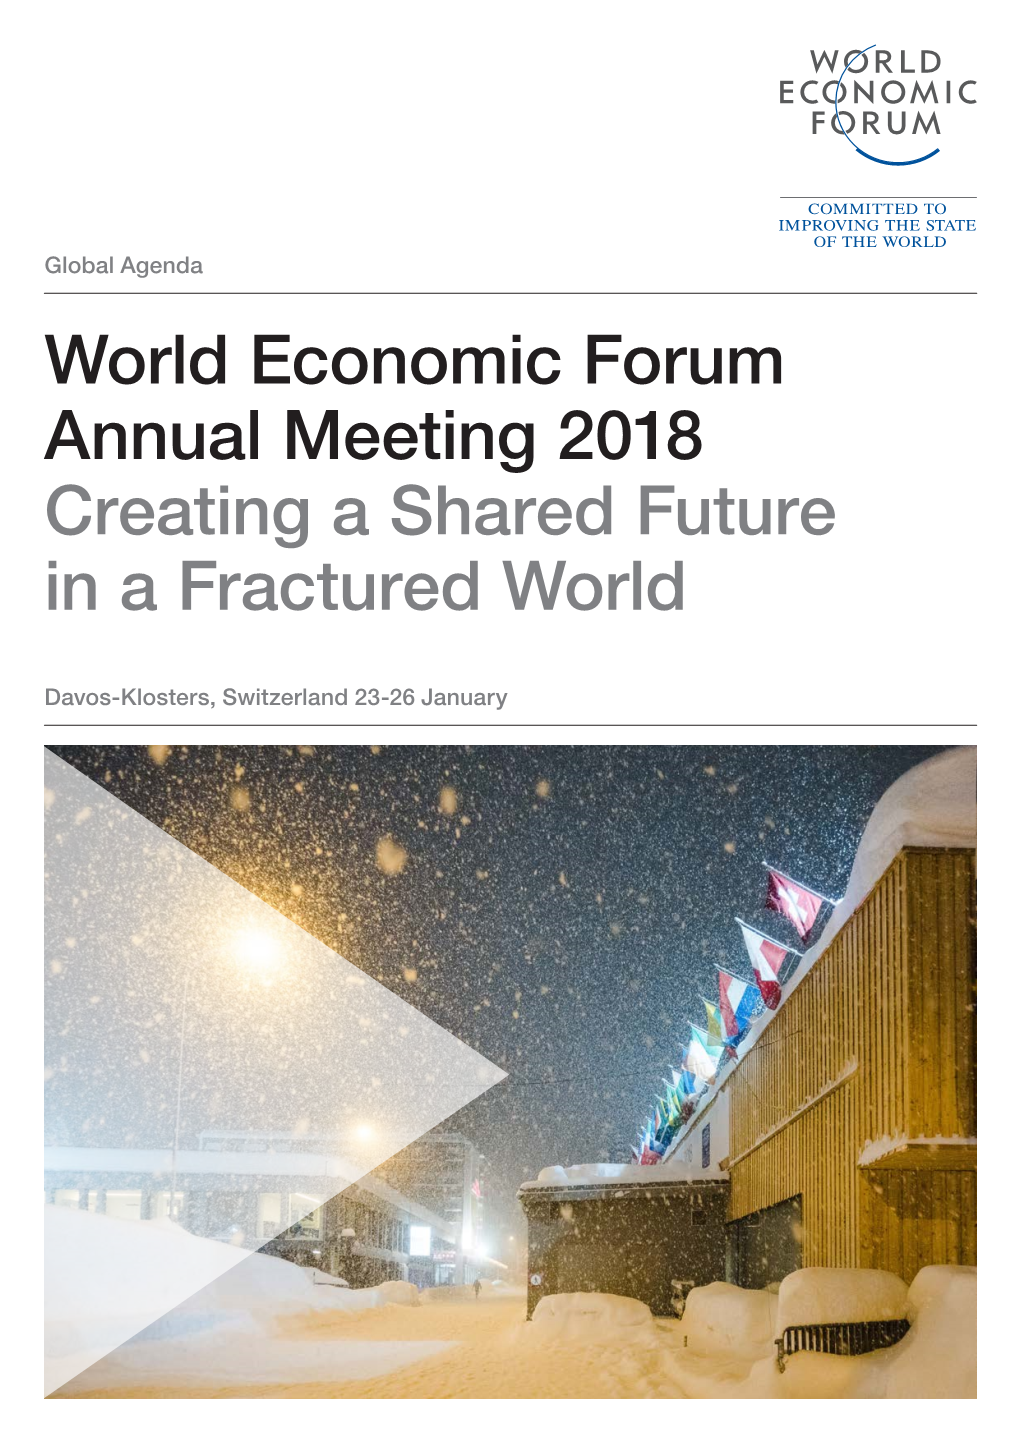 World Economic Forum Annual Meeting 2018 Creating a Shared Future in a Fractured World